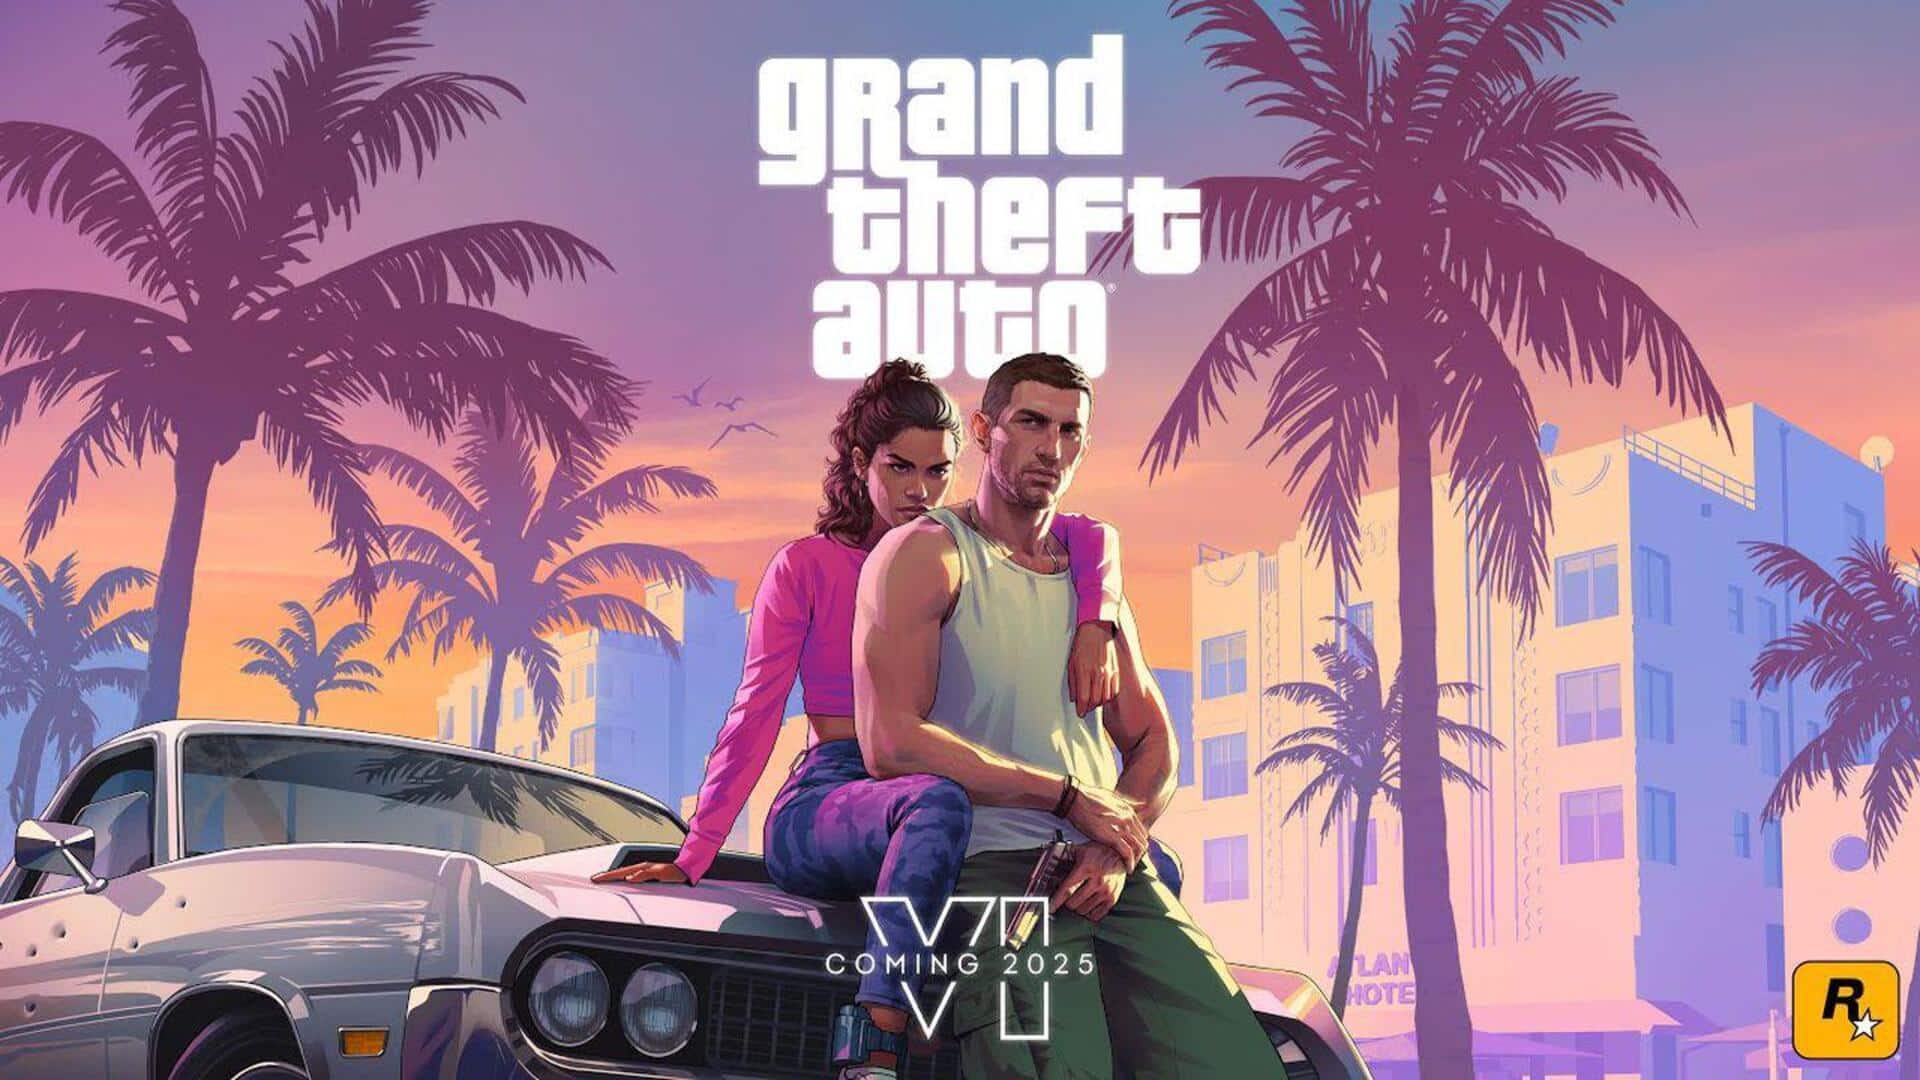 Grand Theft Auto VI confirmed to release in late 2025